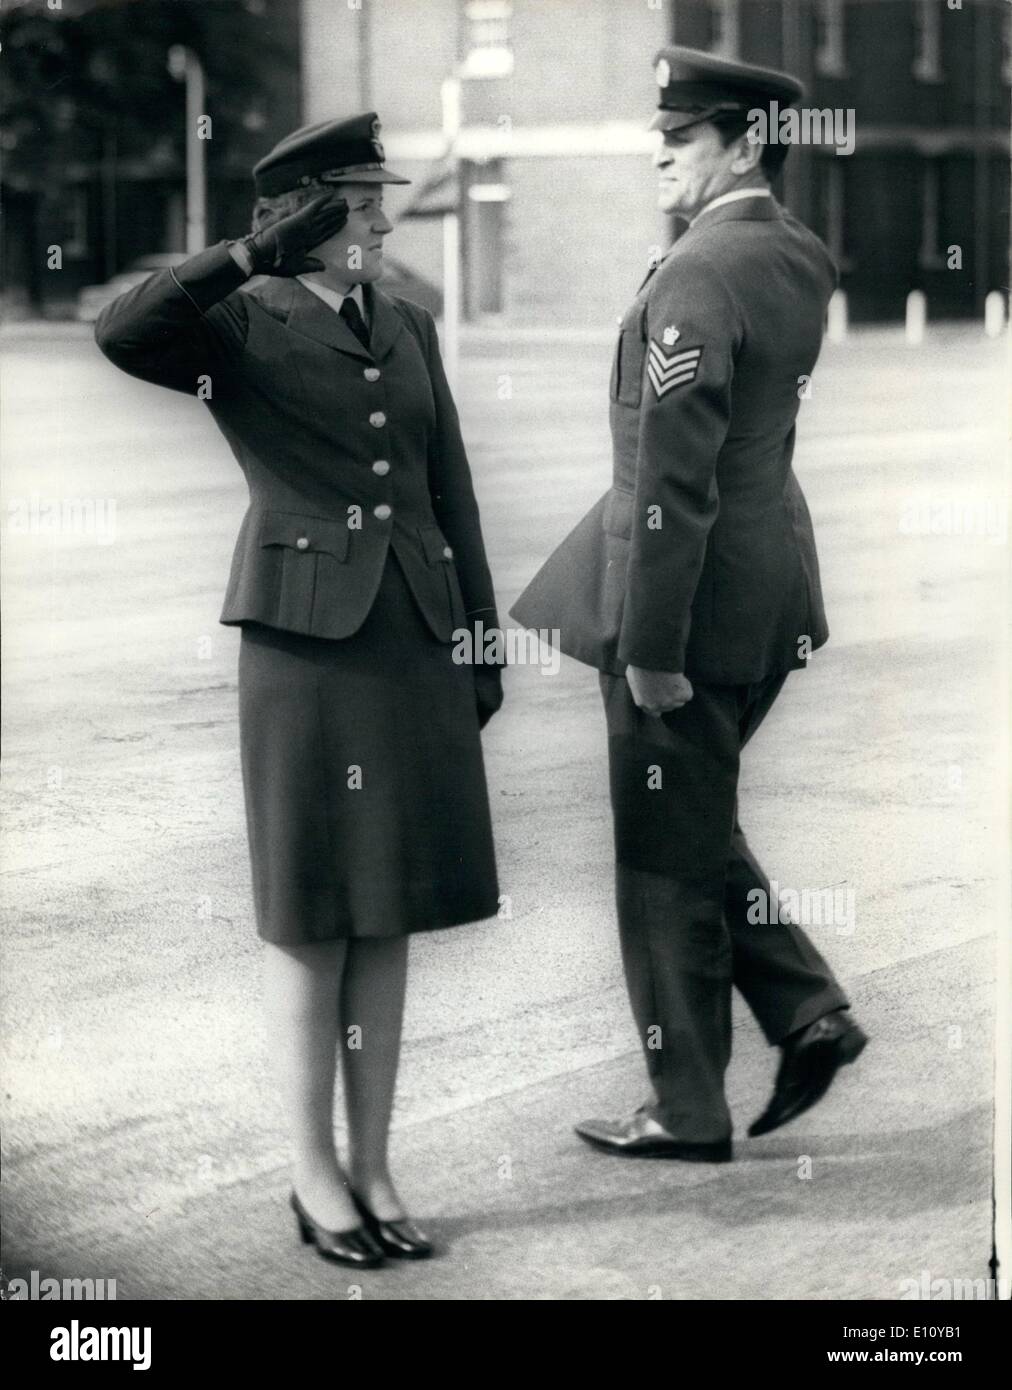 Oct. 10, 1974 - A Salute From Dad: The father of four girls, Flight Sergeant Bill Peden will have to call his eldest daughter ''Mam'' following today's ceremony - by order of the Royal Air Force. Carol Anne, 19, graduated after a parade at the R.A.F. Training Command Officer Cadet Unit at Henlow as a WRAF Pilot Officer. She received her very first respectful salute from her own dad. Carol Anne joined the Women's Royal Air Force on April 21 this year shortly after her family came home from a tour of duty in Cyprus where her father was based at RAF Akrotiri Stock Photo